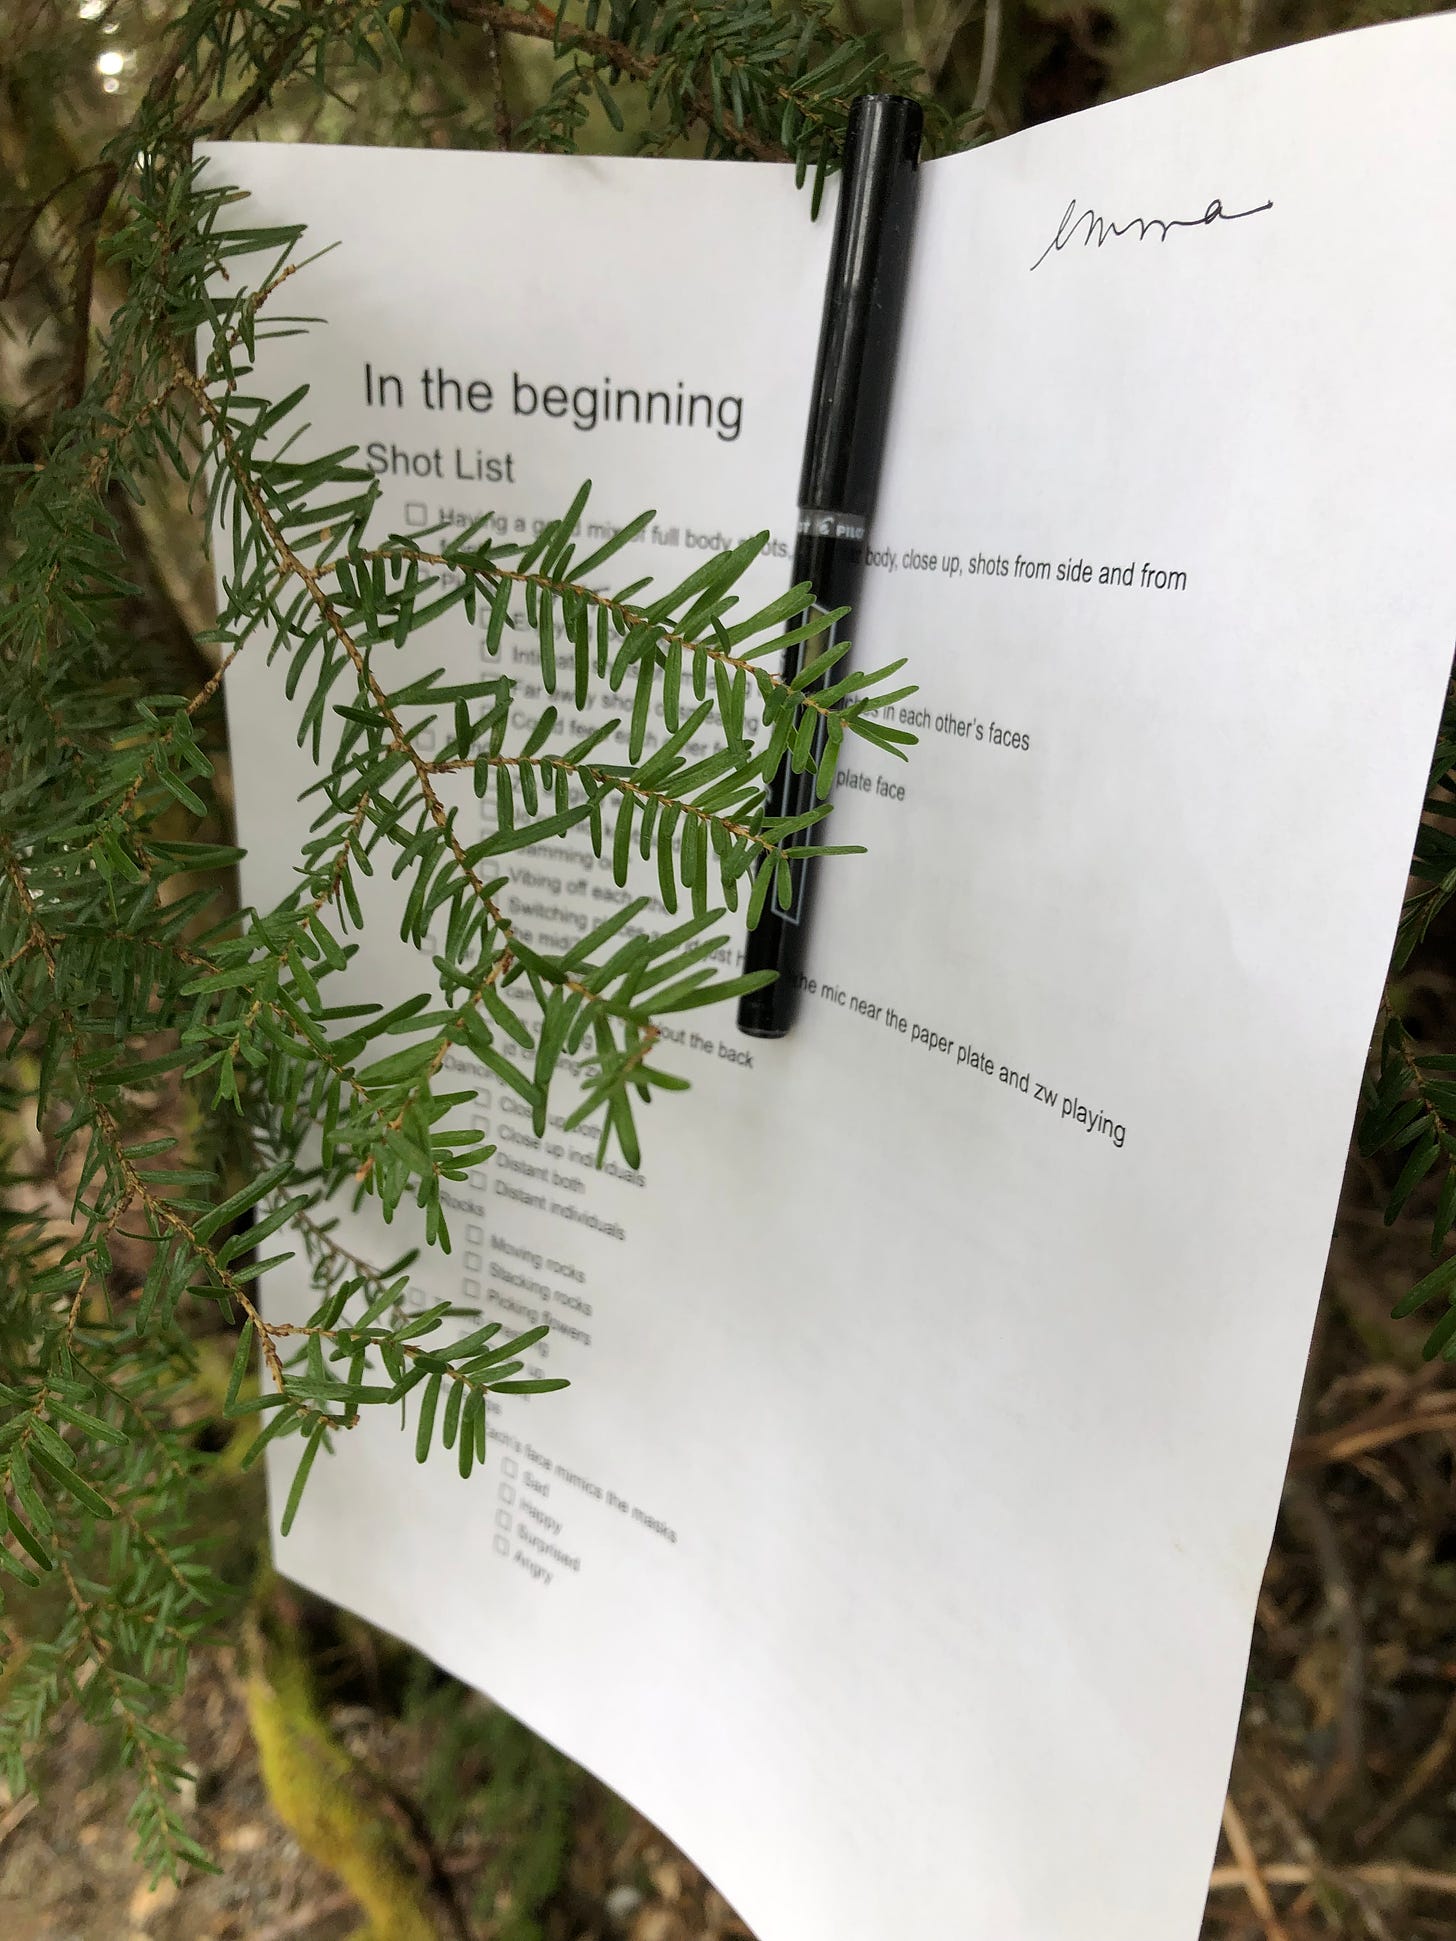 A piece of paper containing the music video shot list is pinned to a branch with a pen.